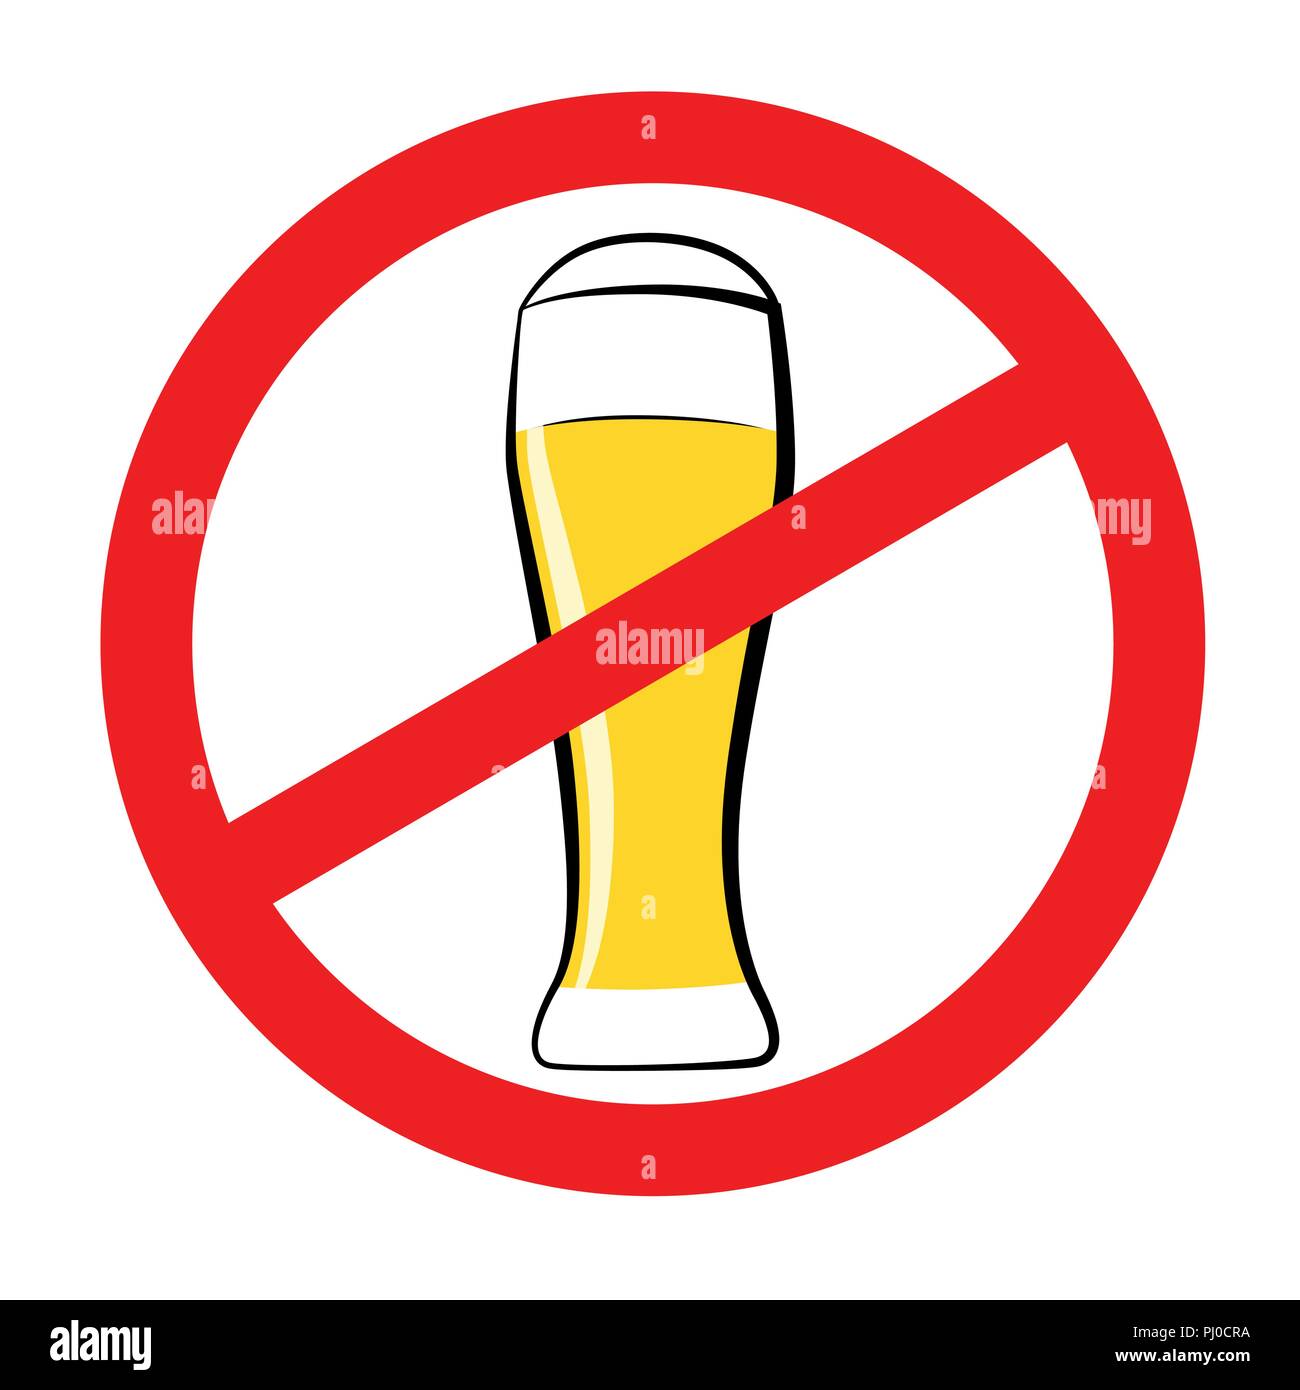 No beer sign Stock Vector Images - Alamy